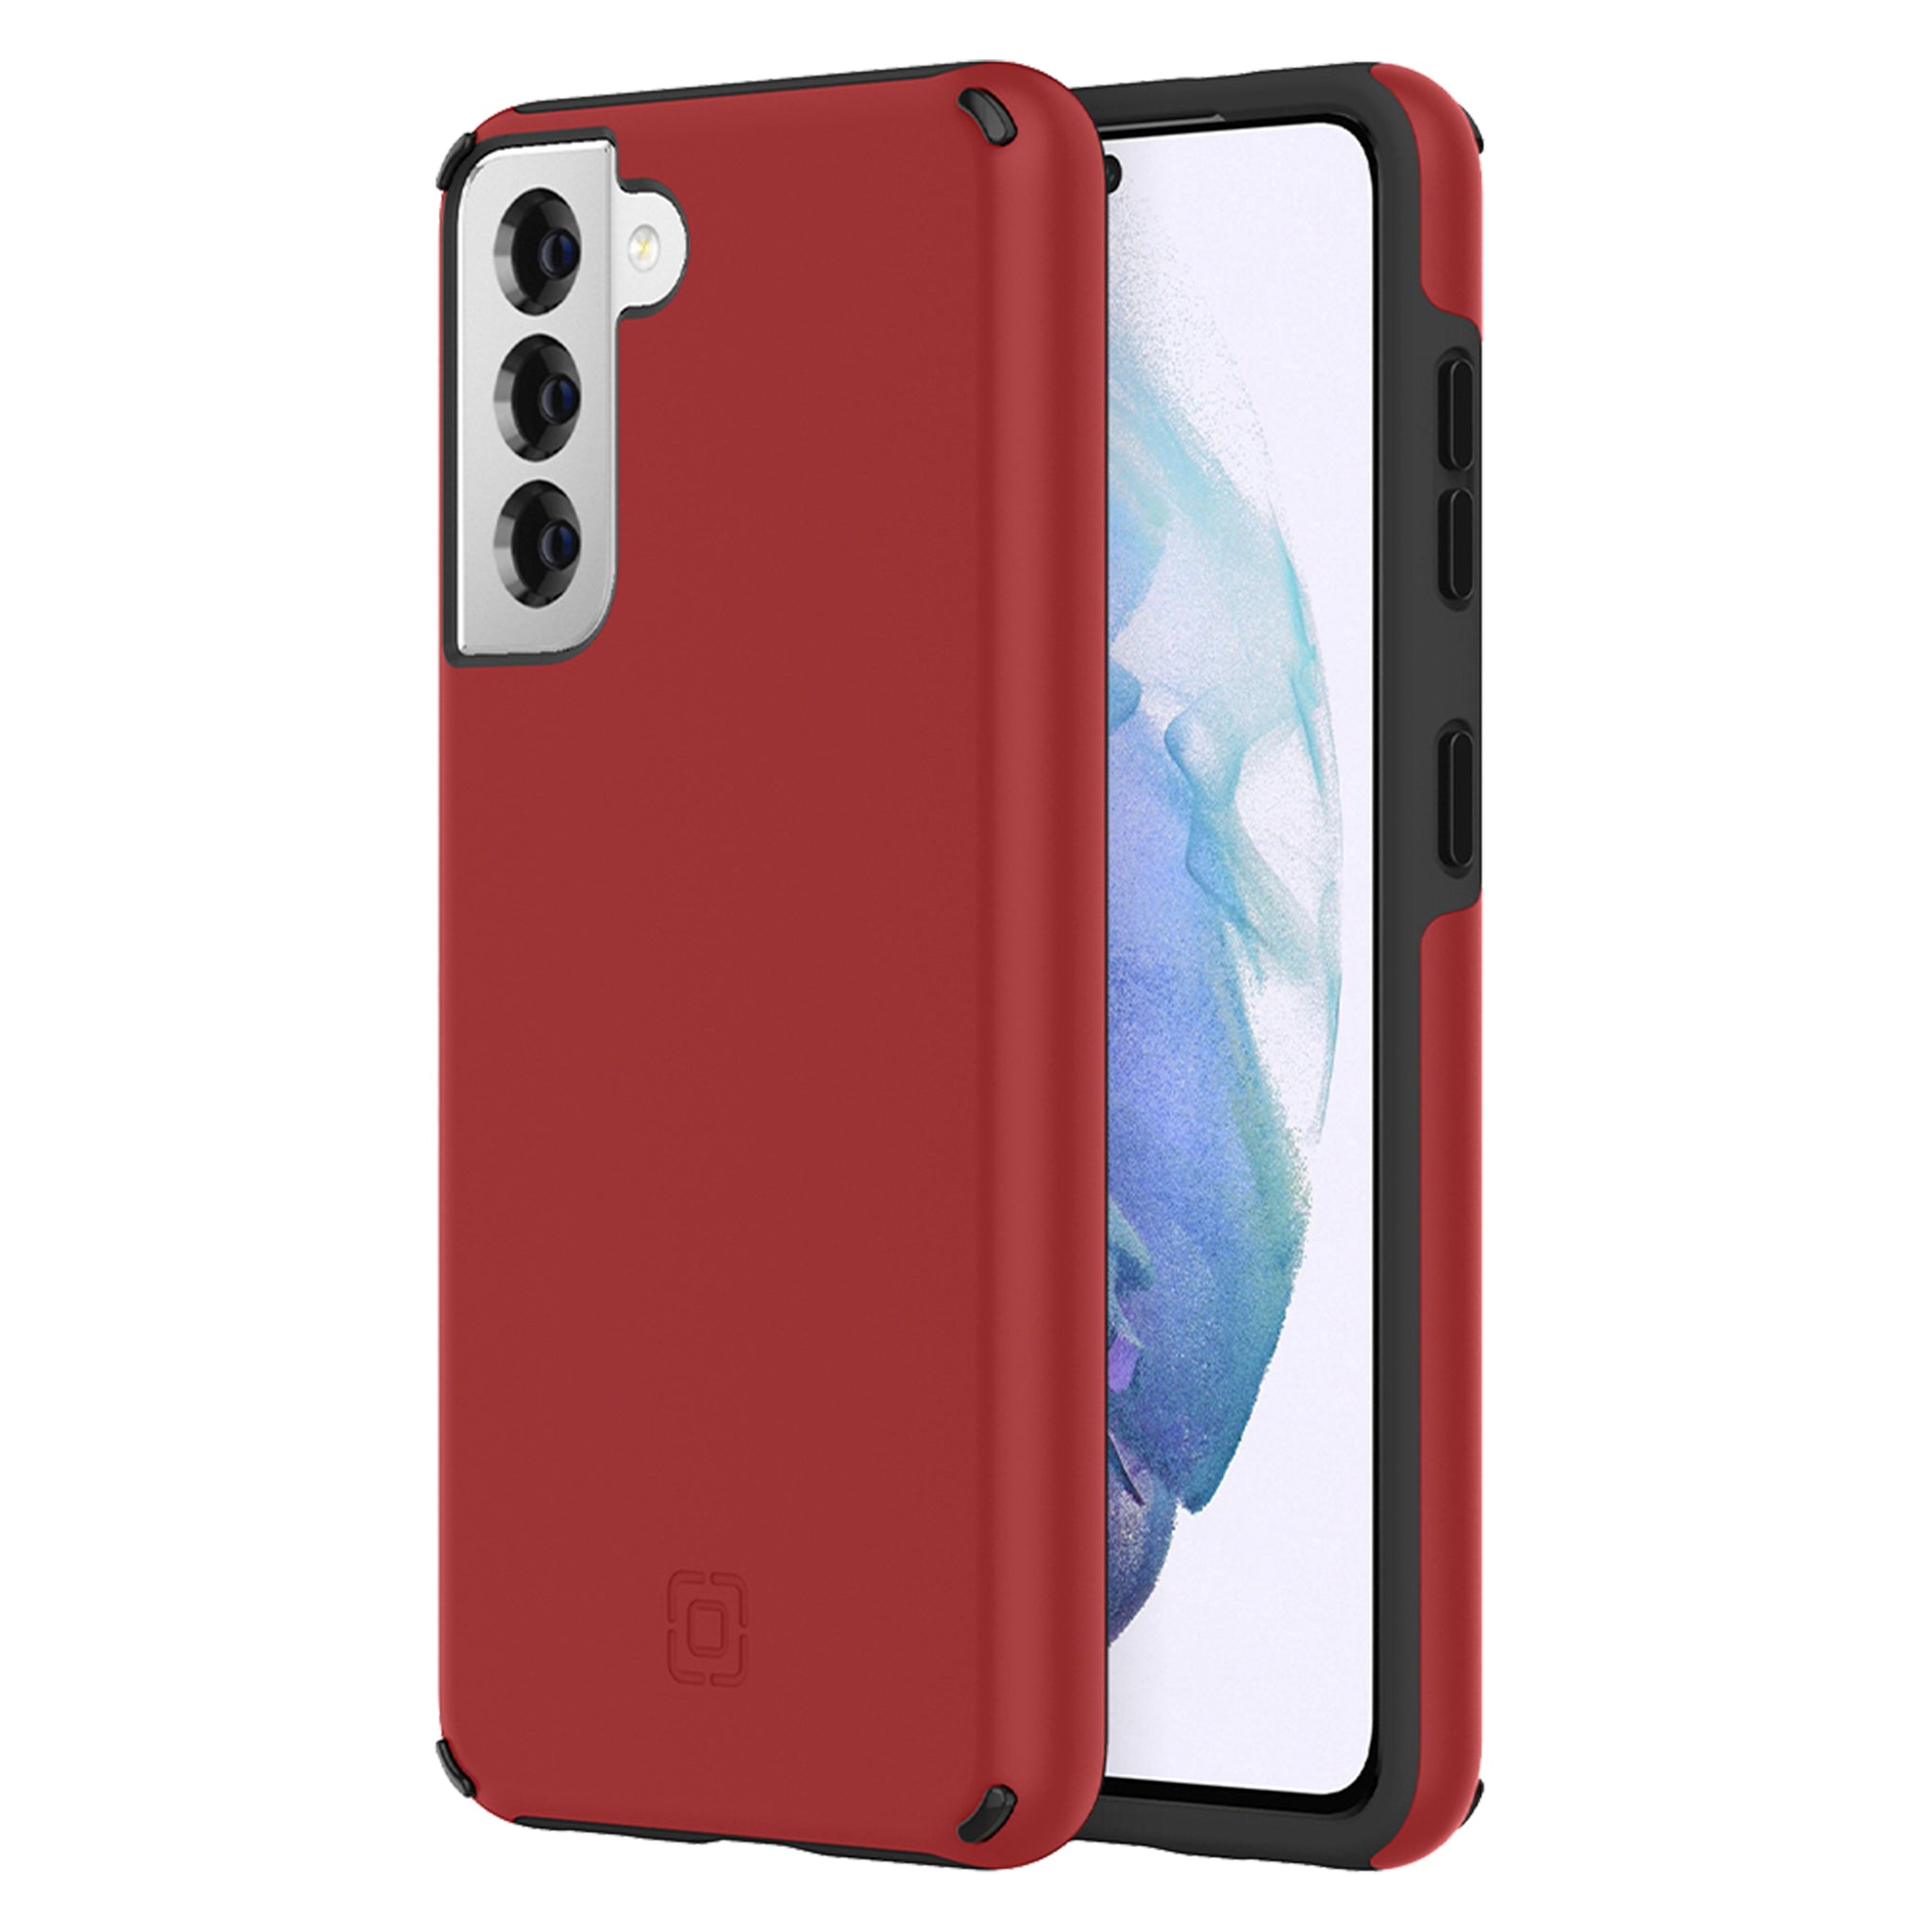 Incipio - Duo Case For Samsung Galaxy S21 5g - Salsa Red And Black